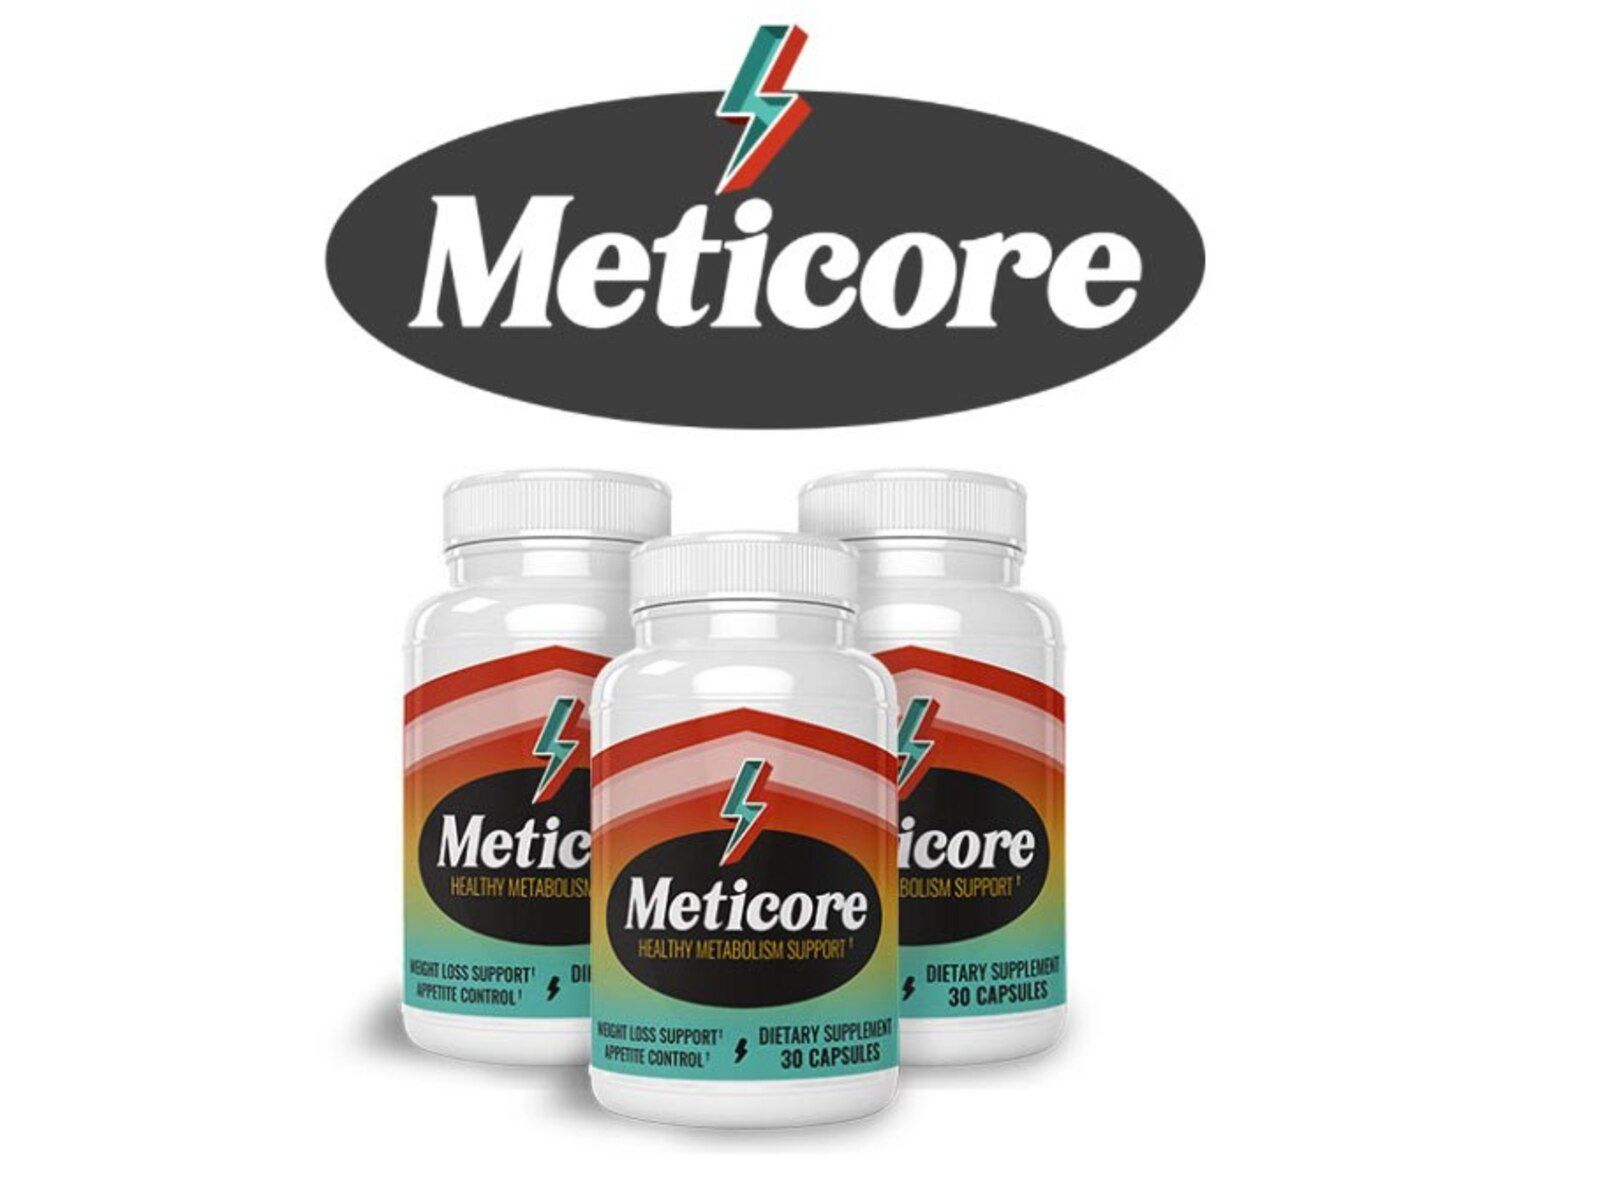 Meticore Reviews From Customers Are All You Need To Start Your Weight Loss Journey